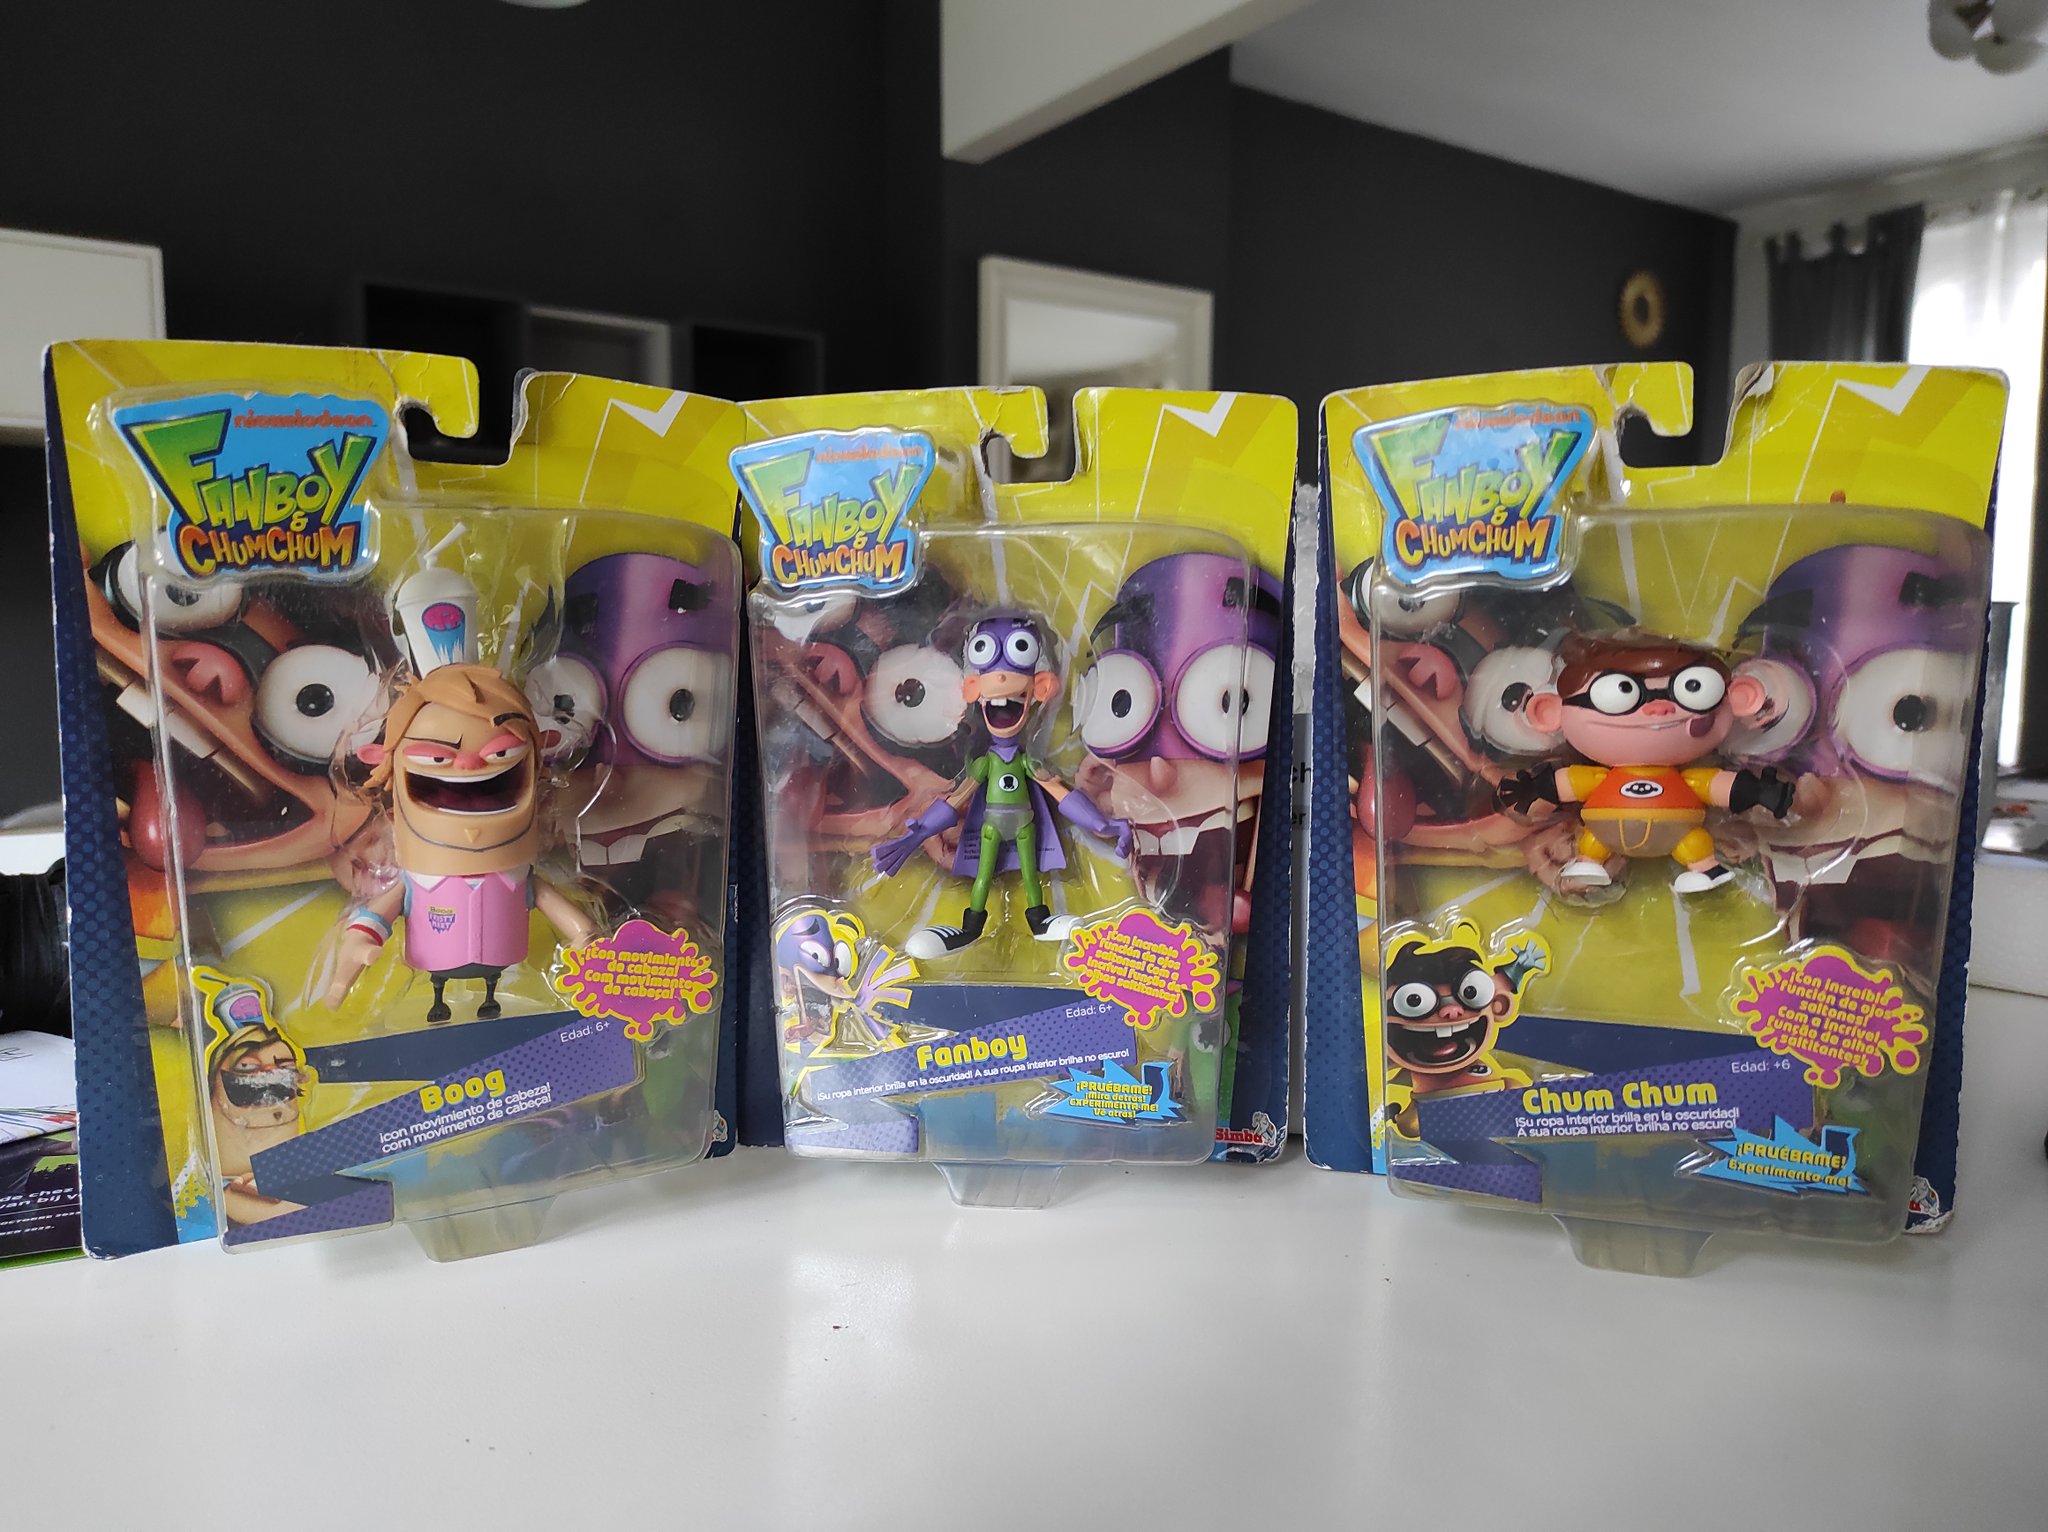 Twitter-এ Funk Flenkers: "I just received these super cool figurines from  fanboy and chum chum all I have to do is find man arctica and the  collection will be complete https://t.co/VU4qUaavGp" /